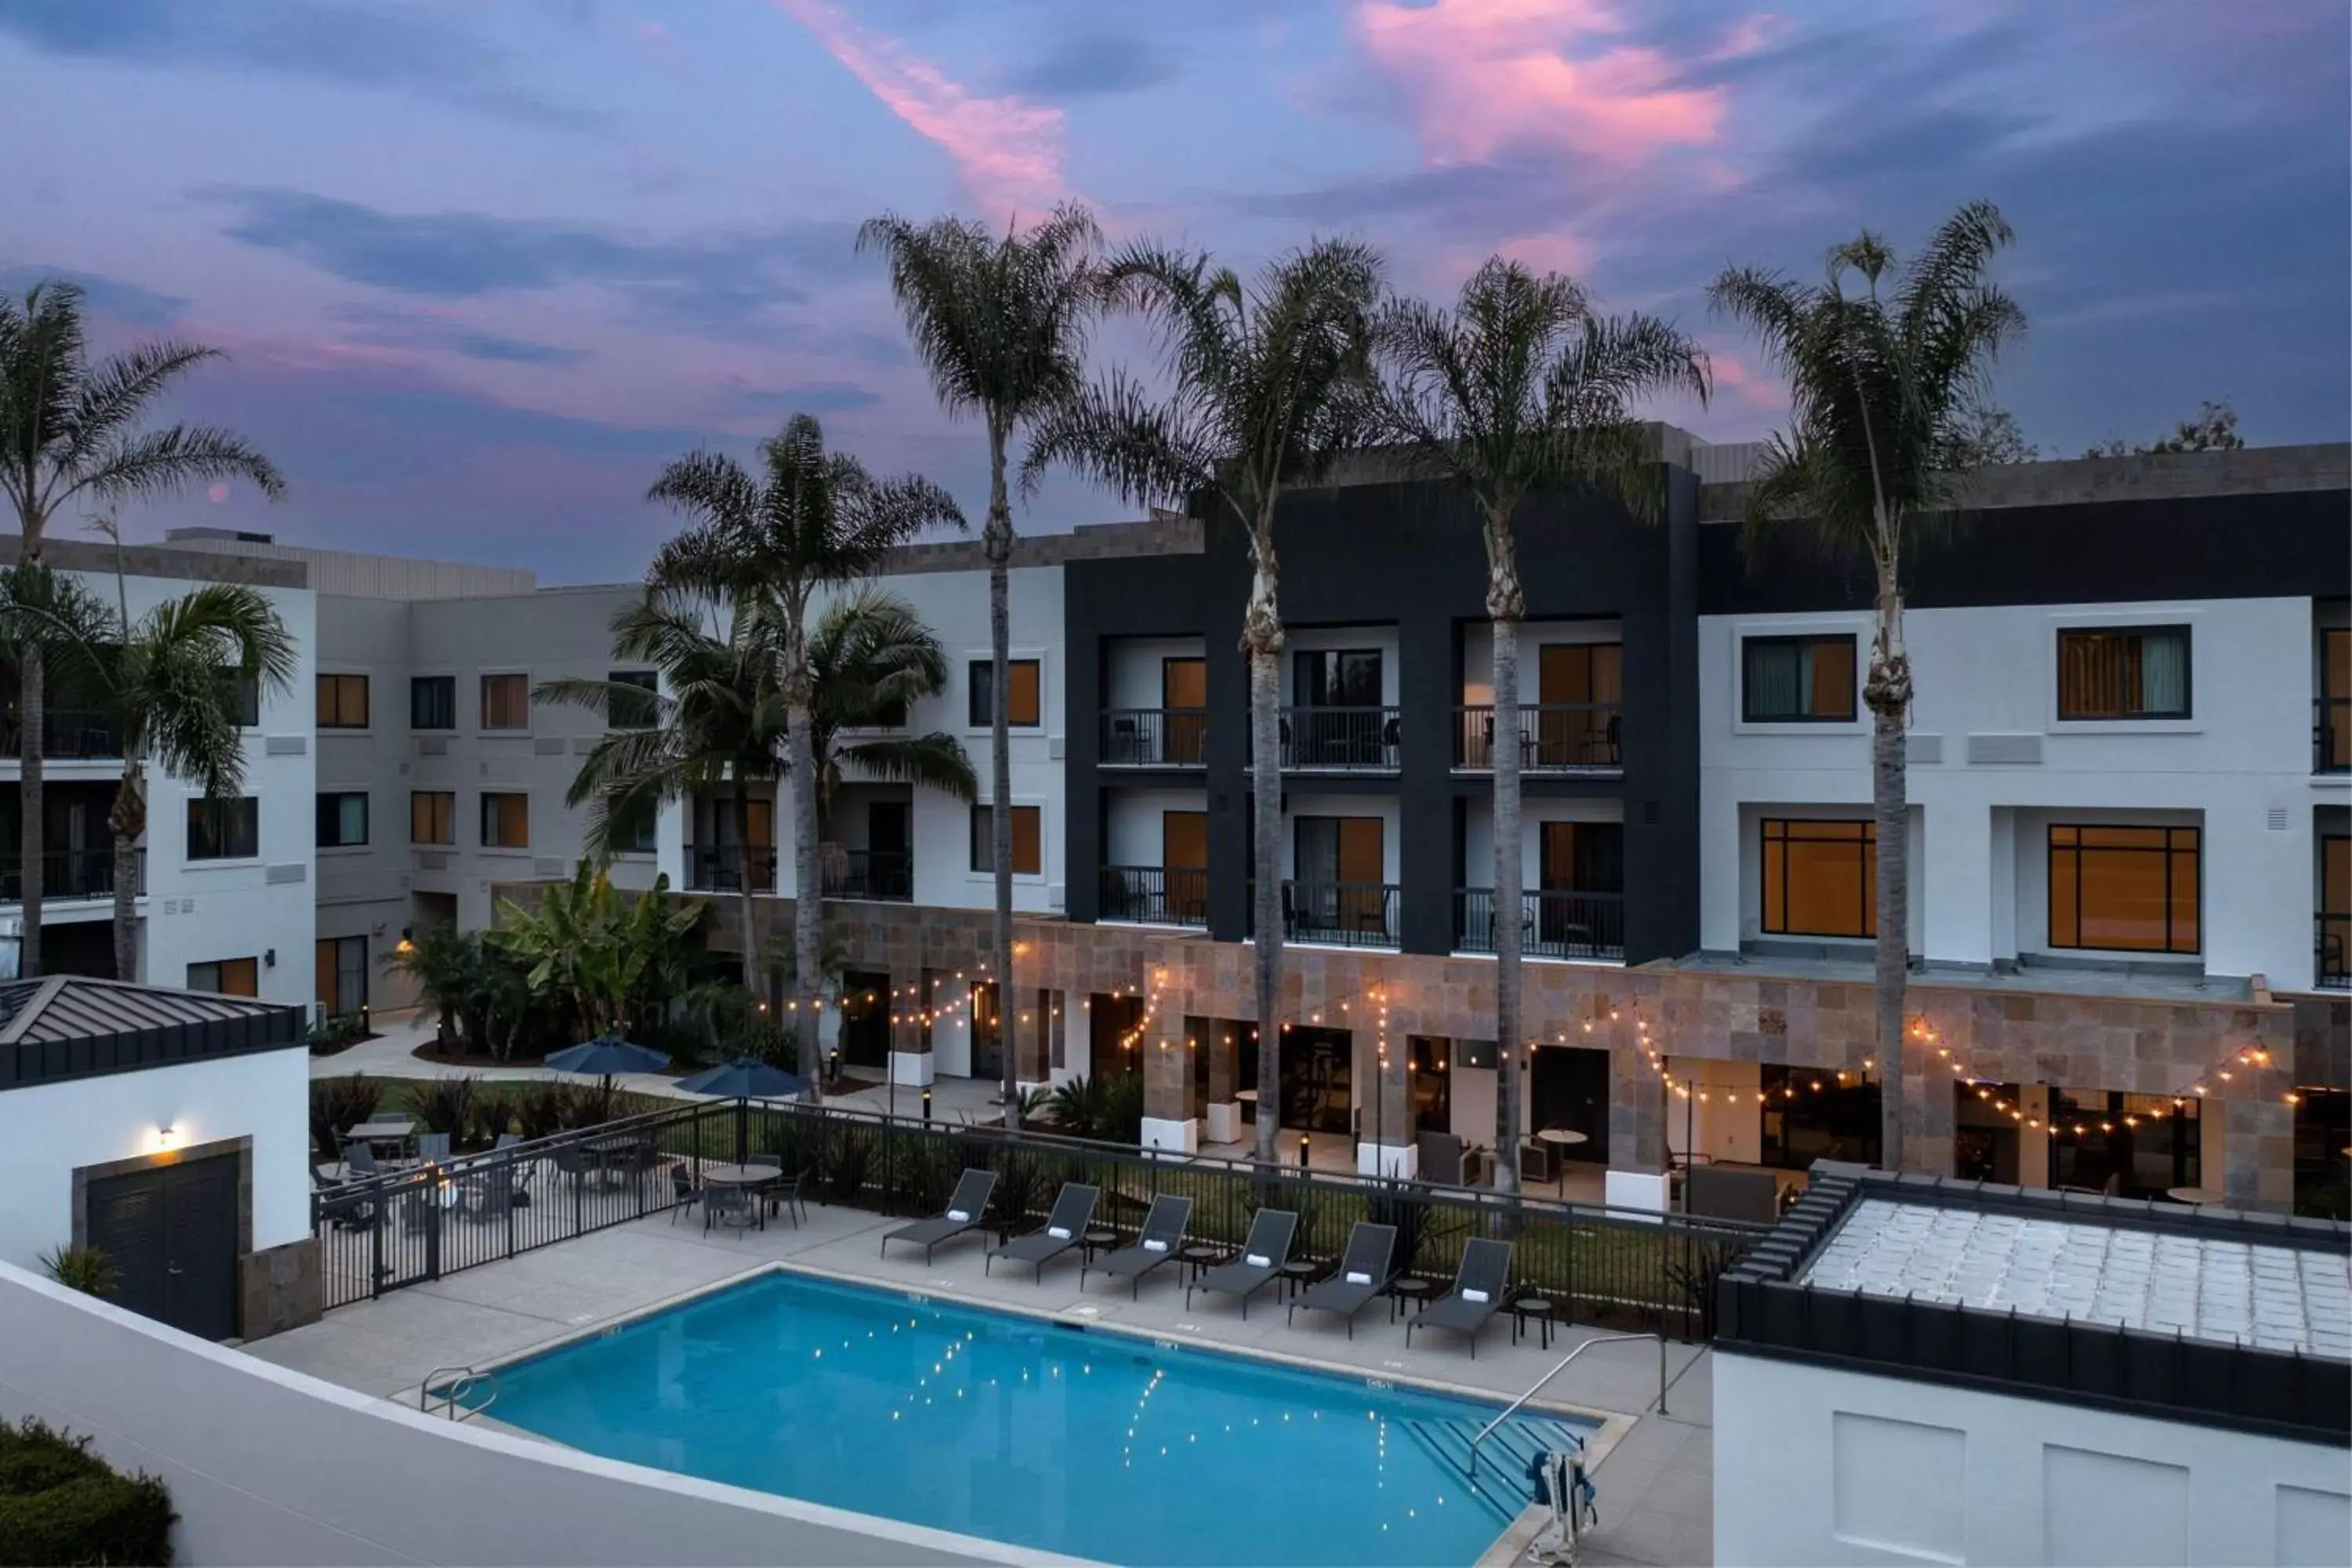 Property building, Swimming Pool in Courtyard by Marriott San Diego Carlsbad